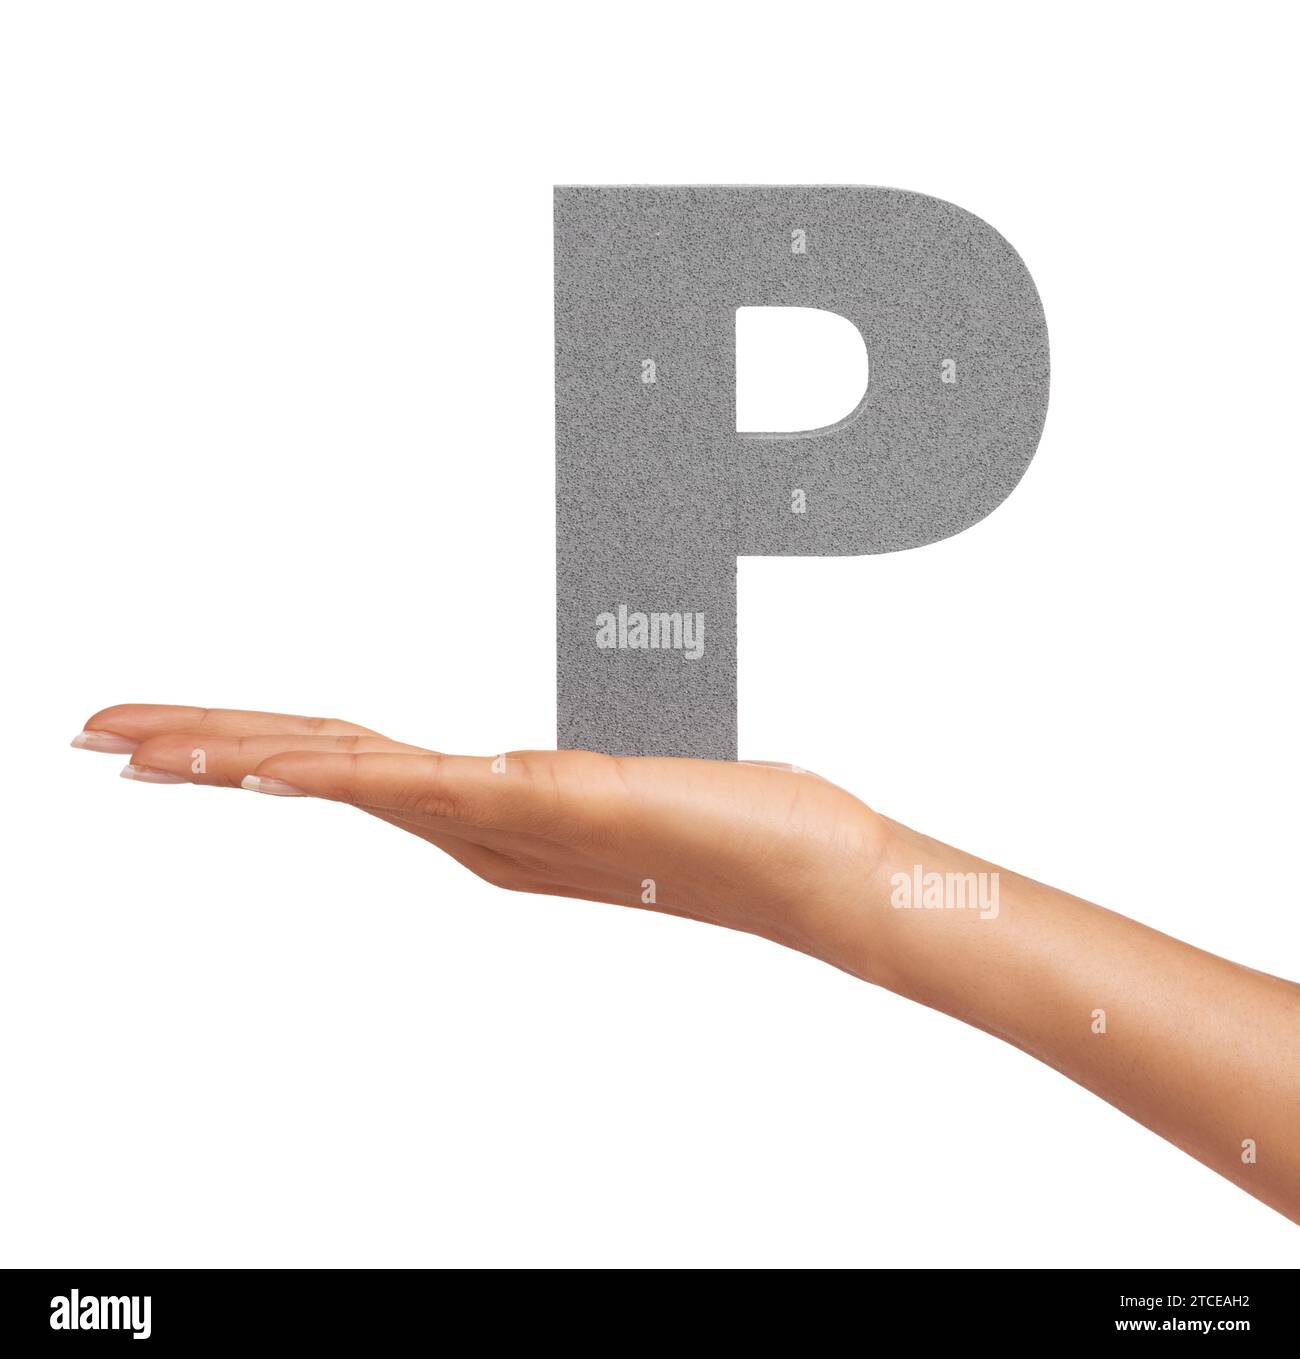 Woman, hand and letter P or alphabet in studio for marketing, learning or teaching presentation. Sign, font or character for icon, text or Stock Photo